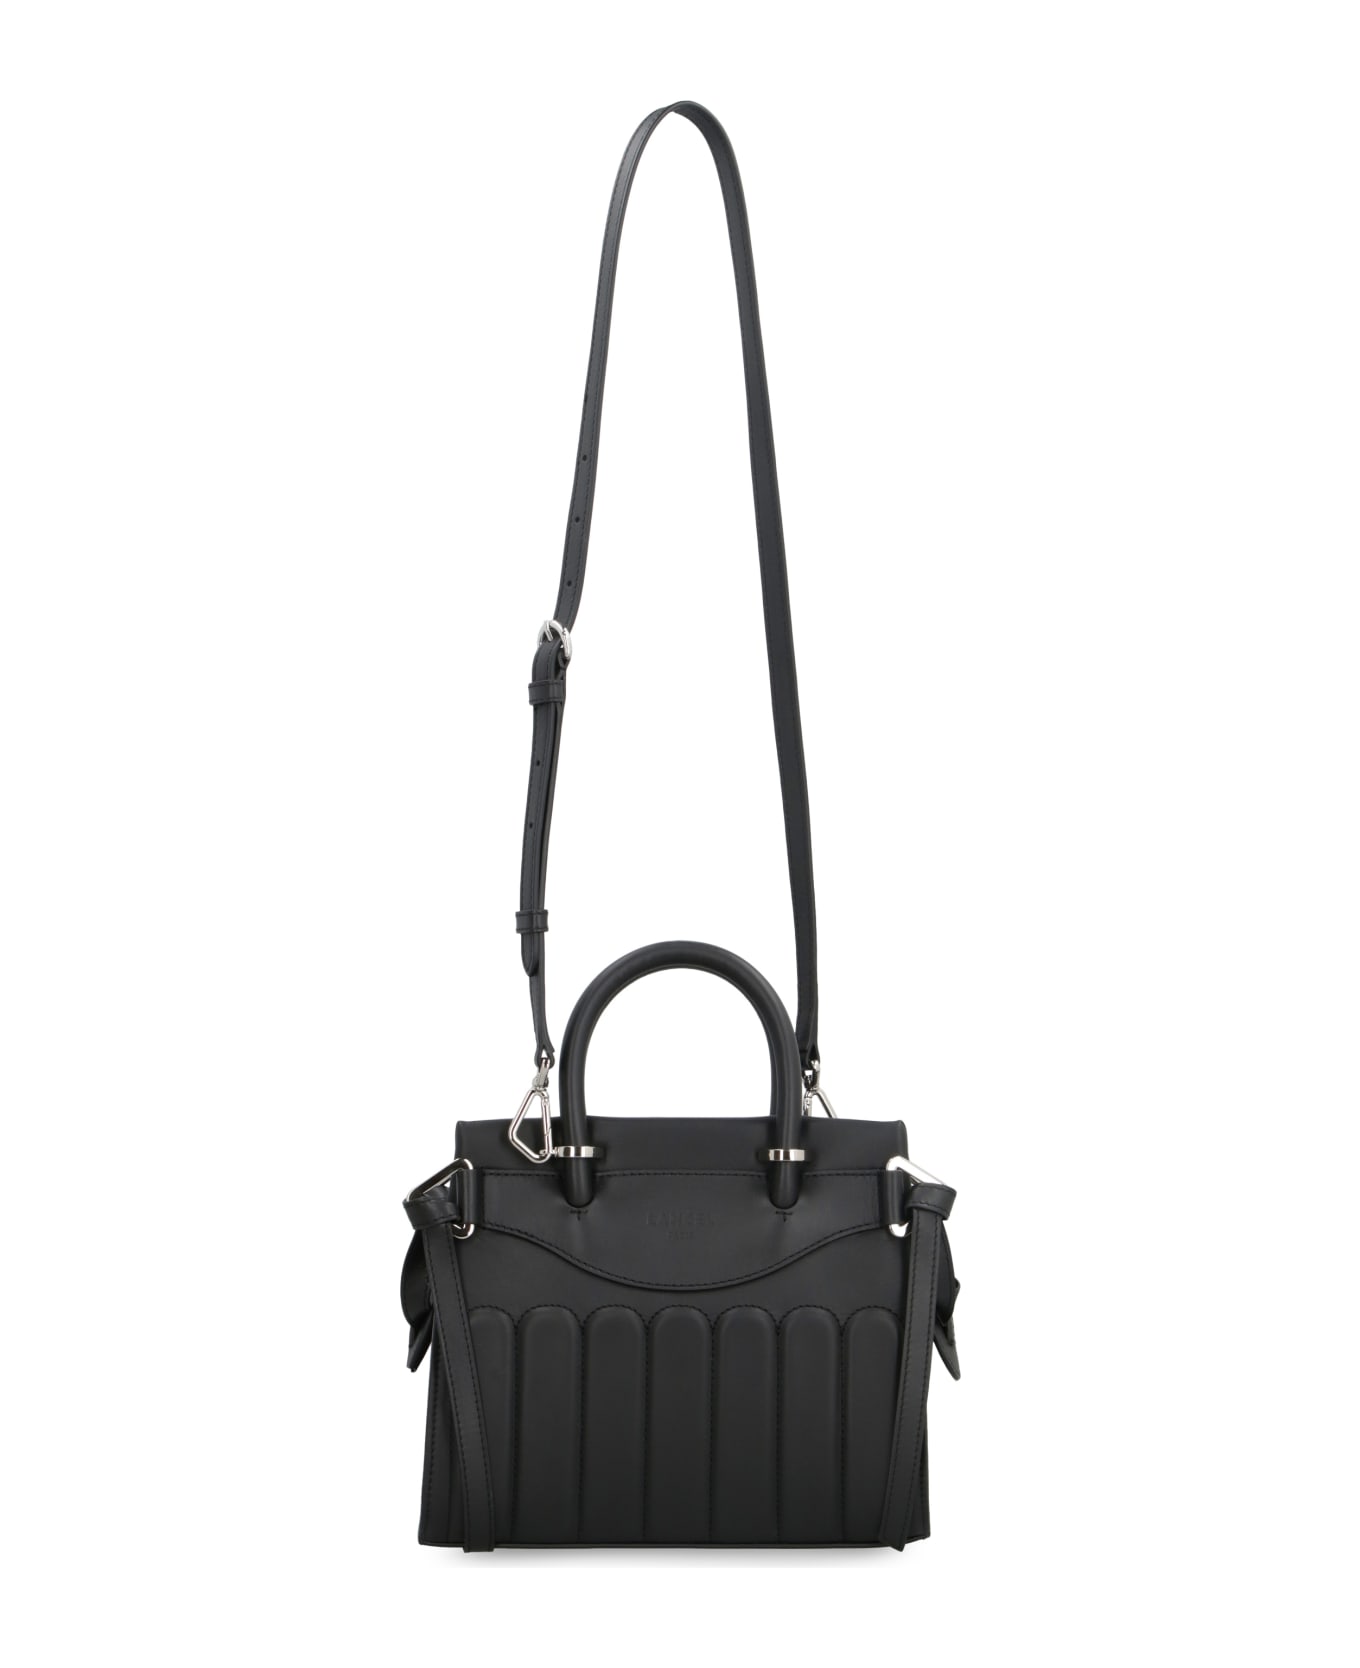 Lancel Rodeo Leather Tote - Black トートバッグ